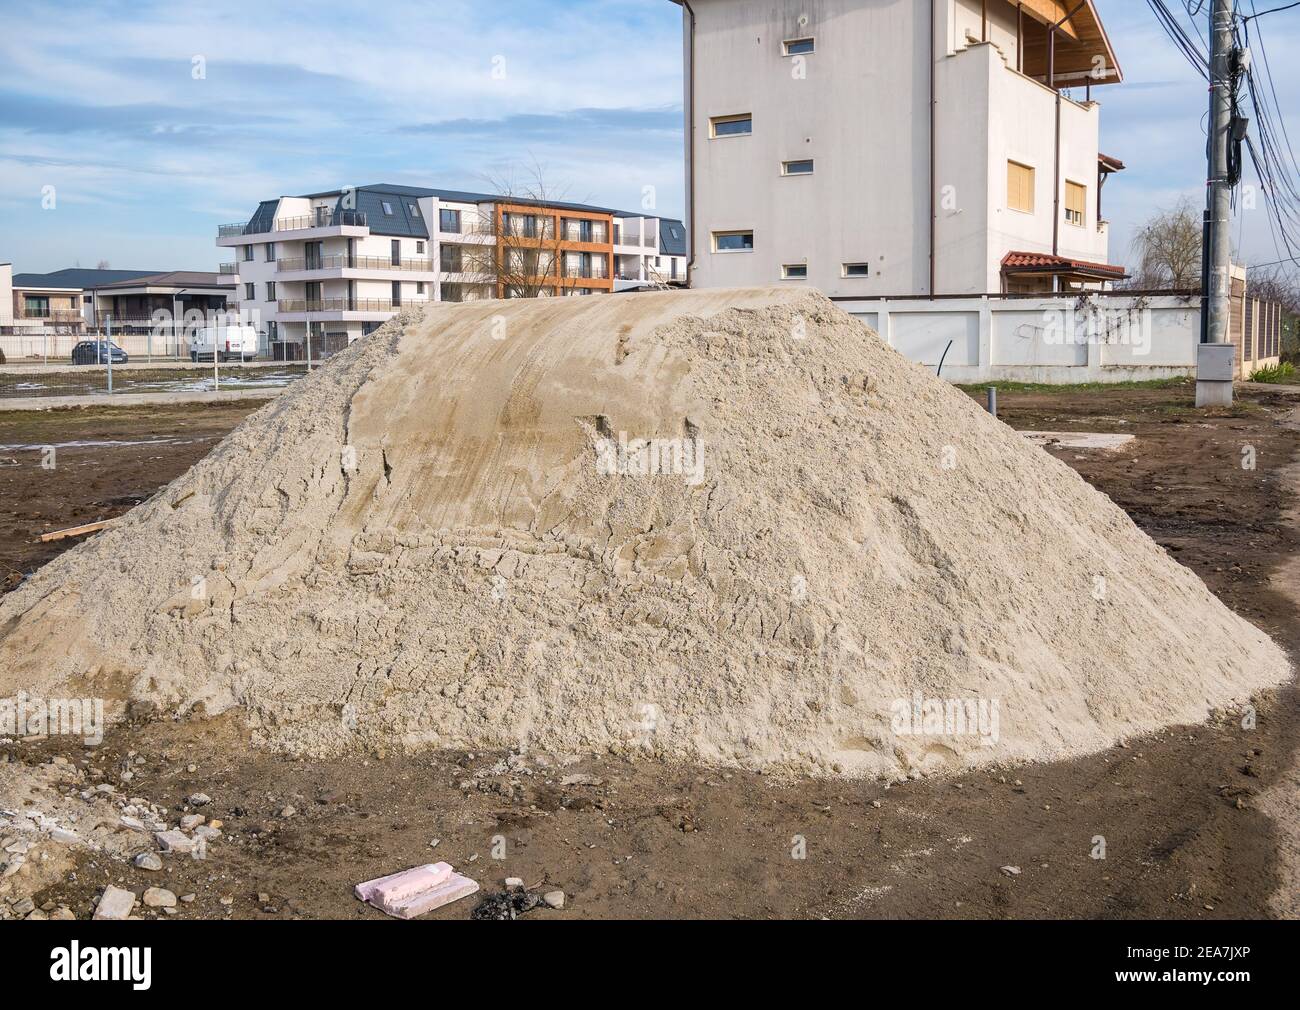 Pile of sand for construction. Sand used to make concrete and road construction. Stock Photo